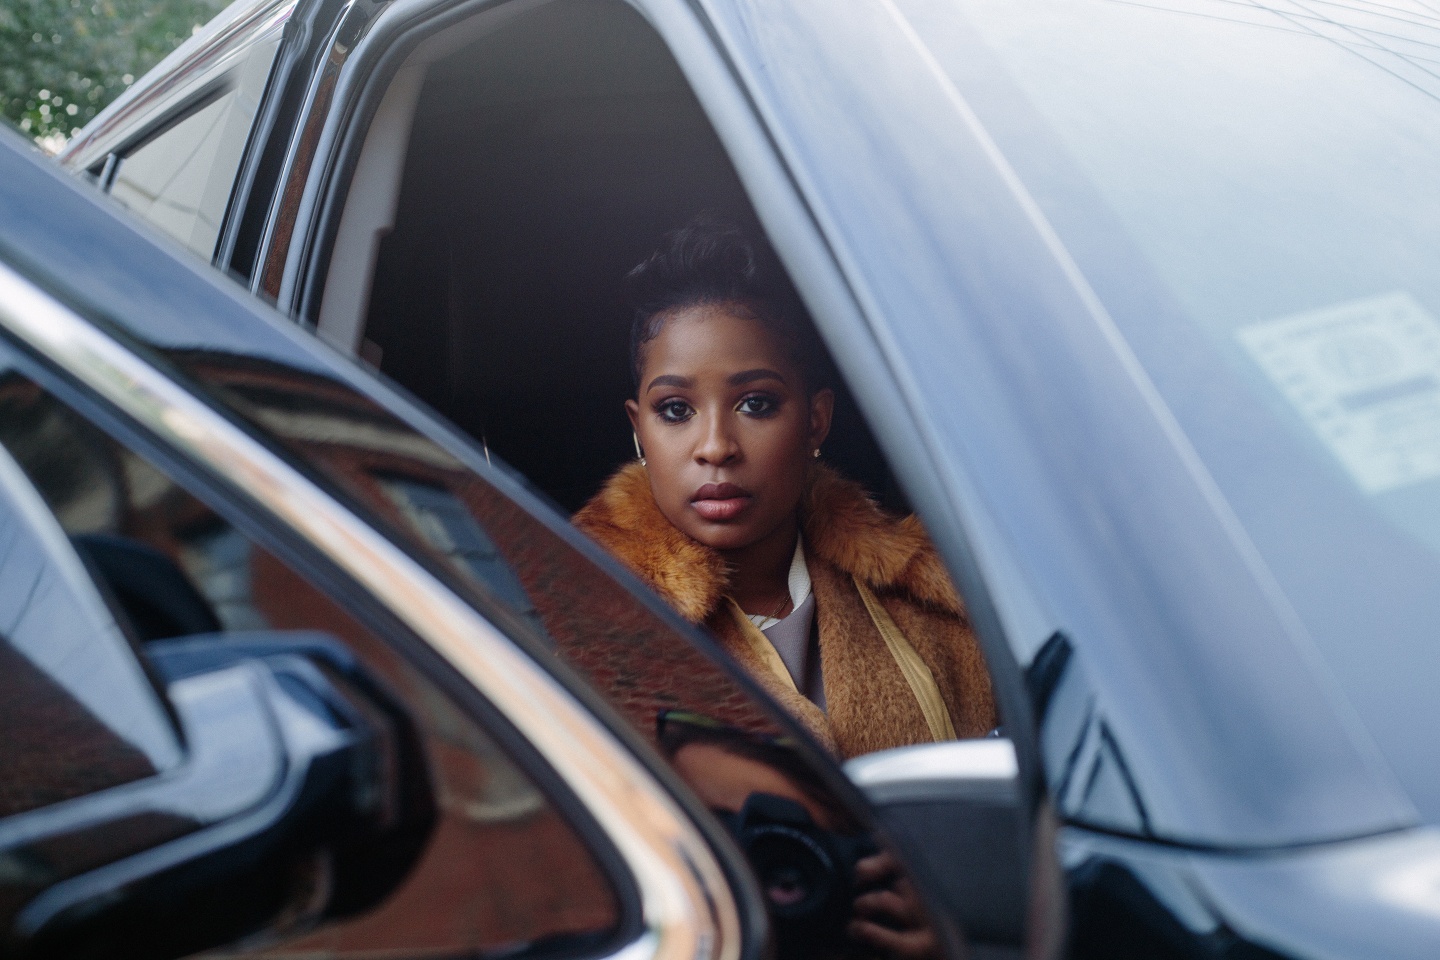 DeJ Loaf Moves In Silence. Now She Wants To Share Her Voice With The World.